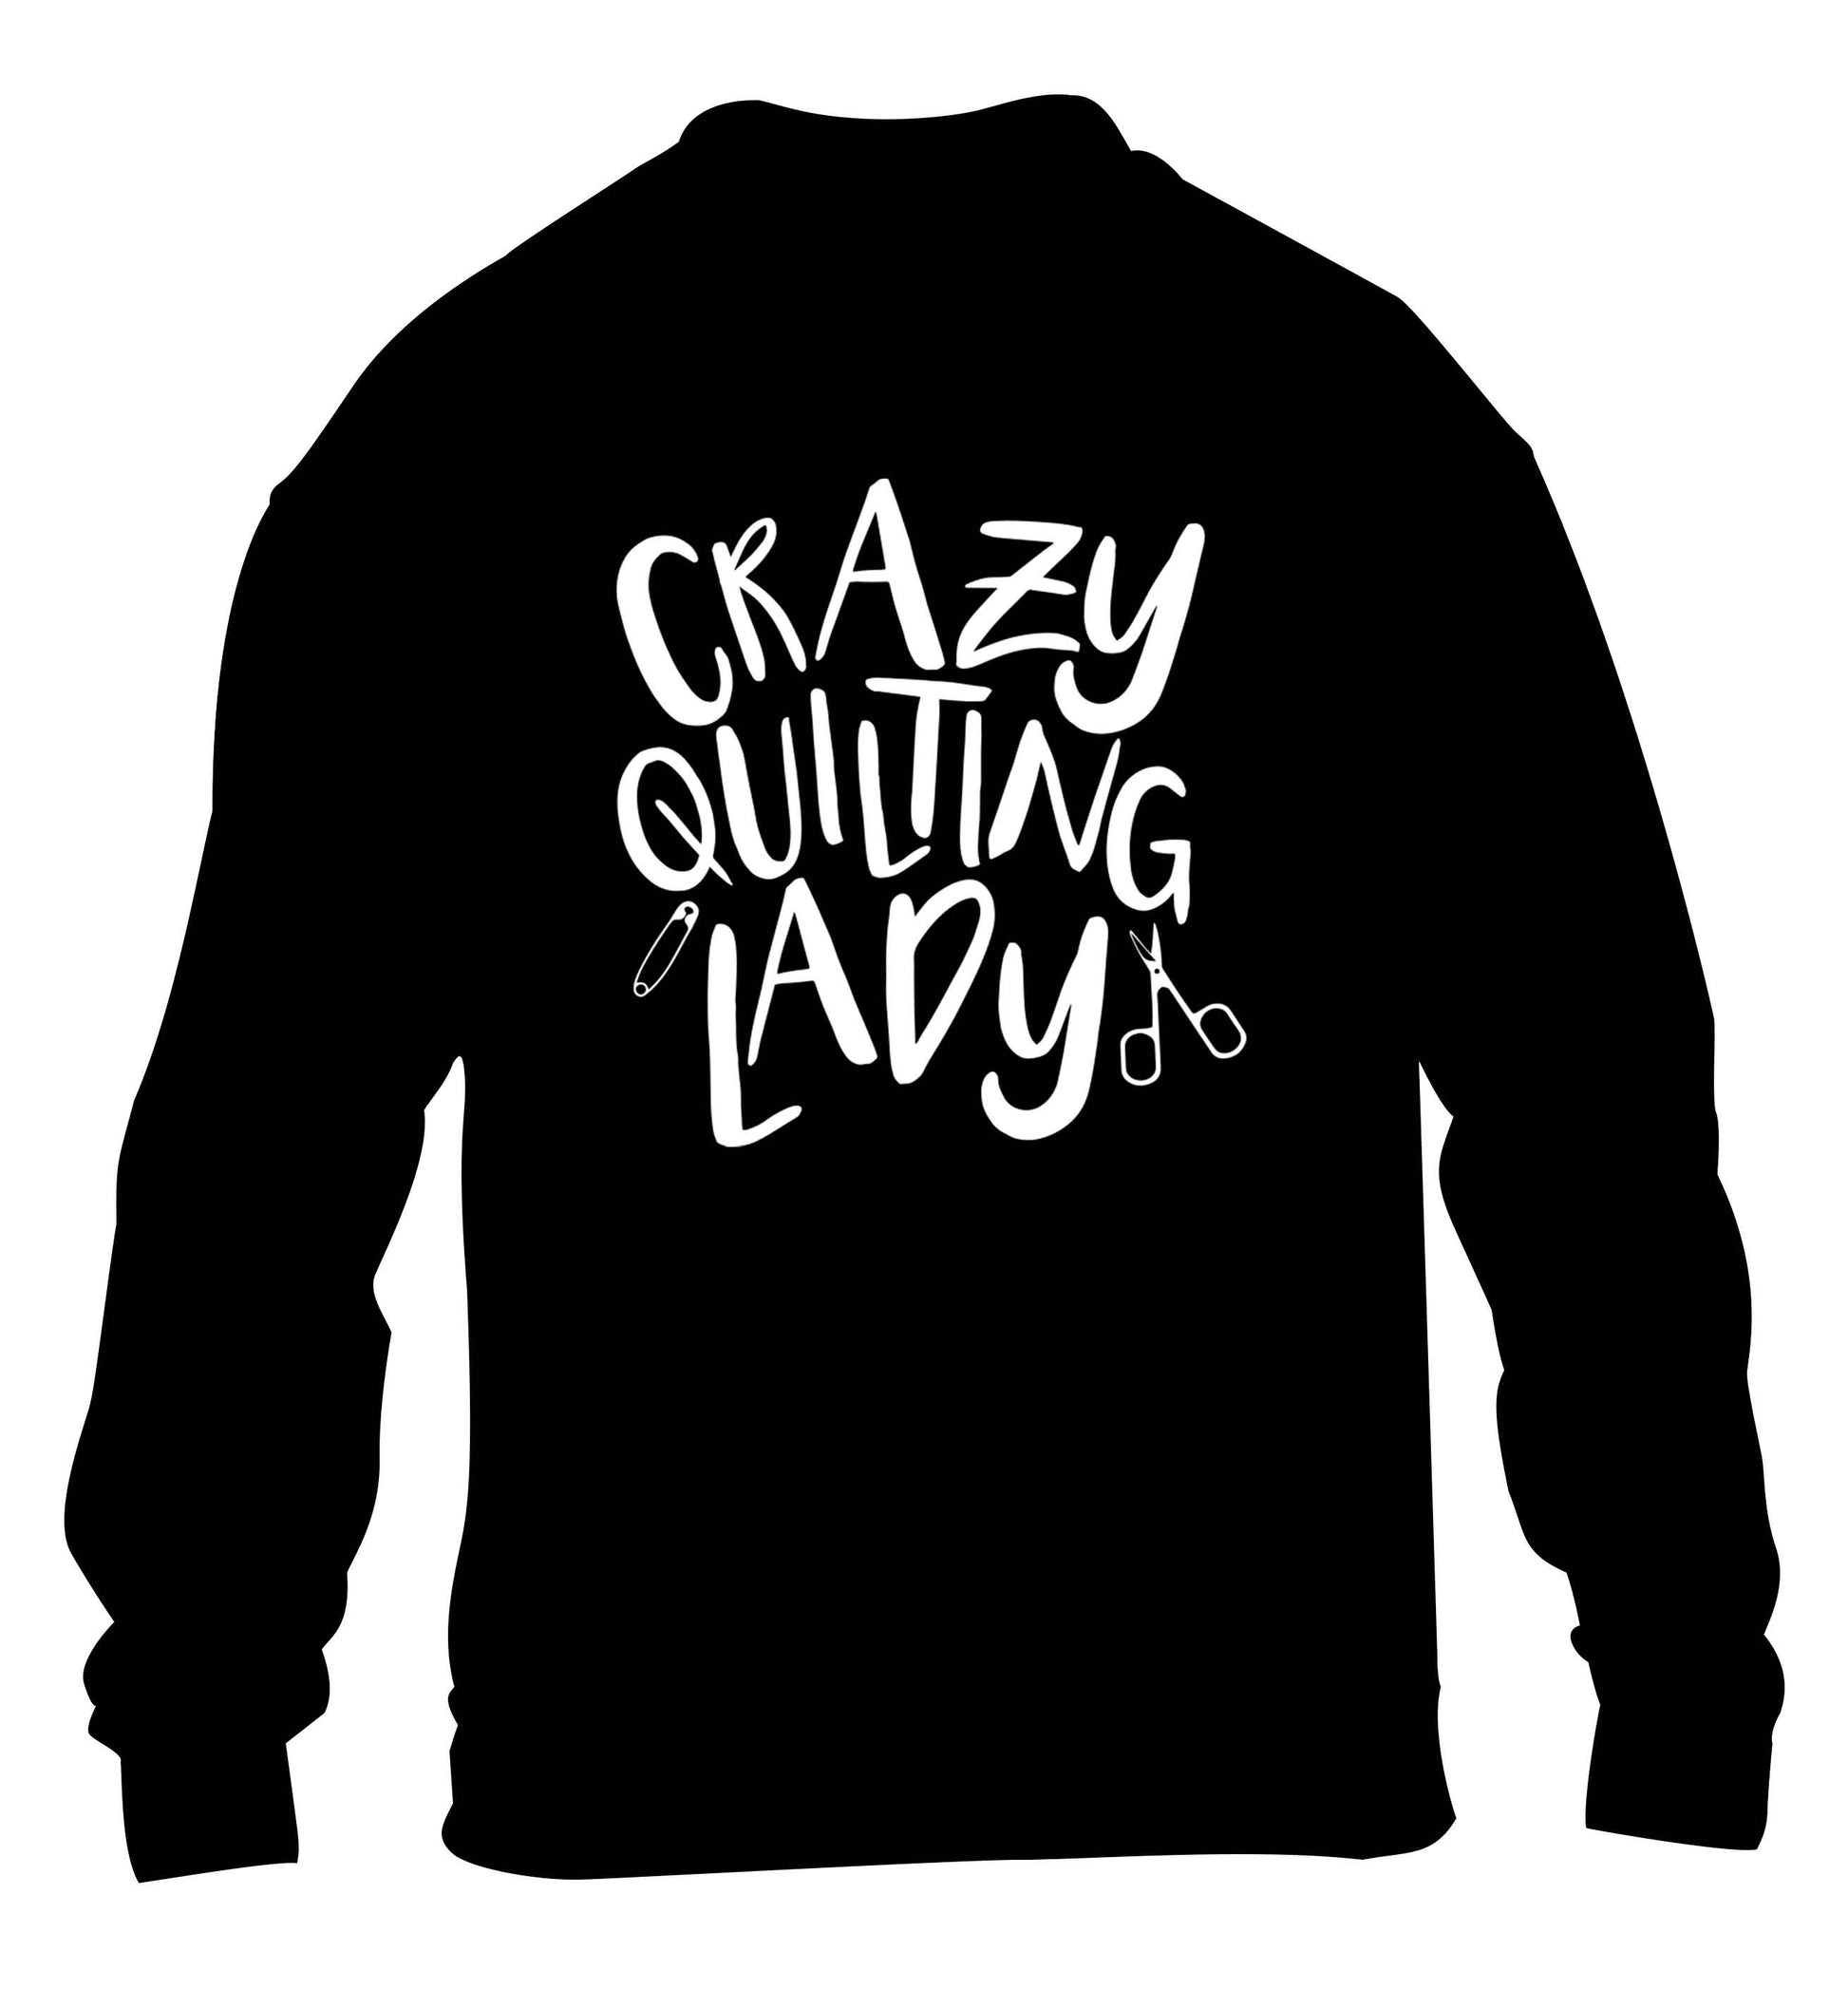 Crazy quilting lady children's black sweater 12-13 Years